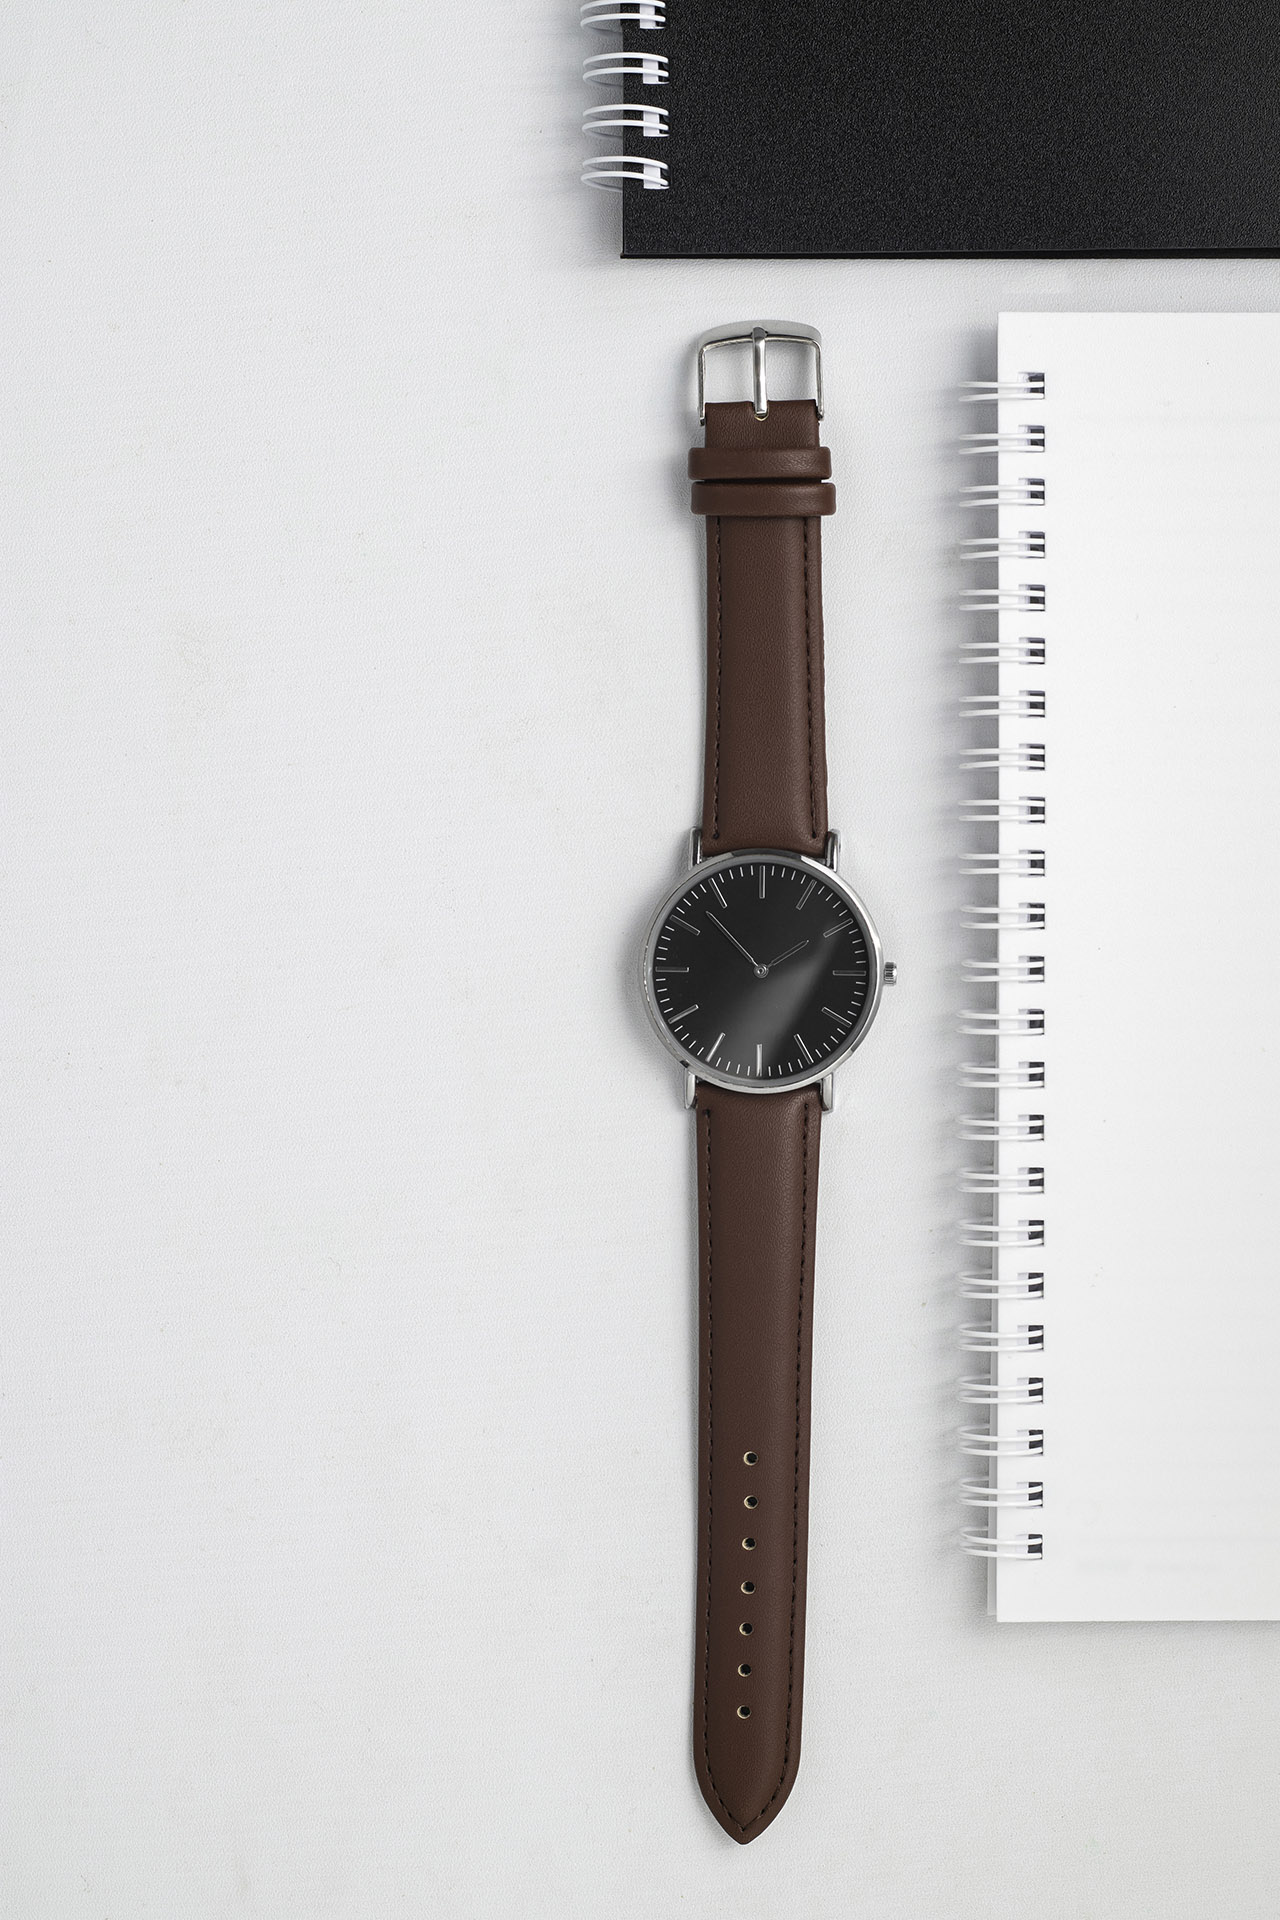 watches-with-brown-leather-strap-white-office-desk